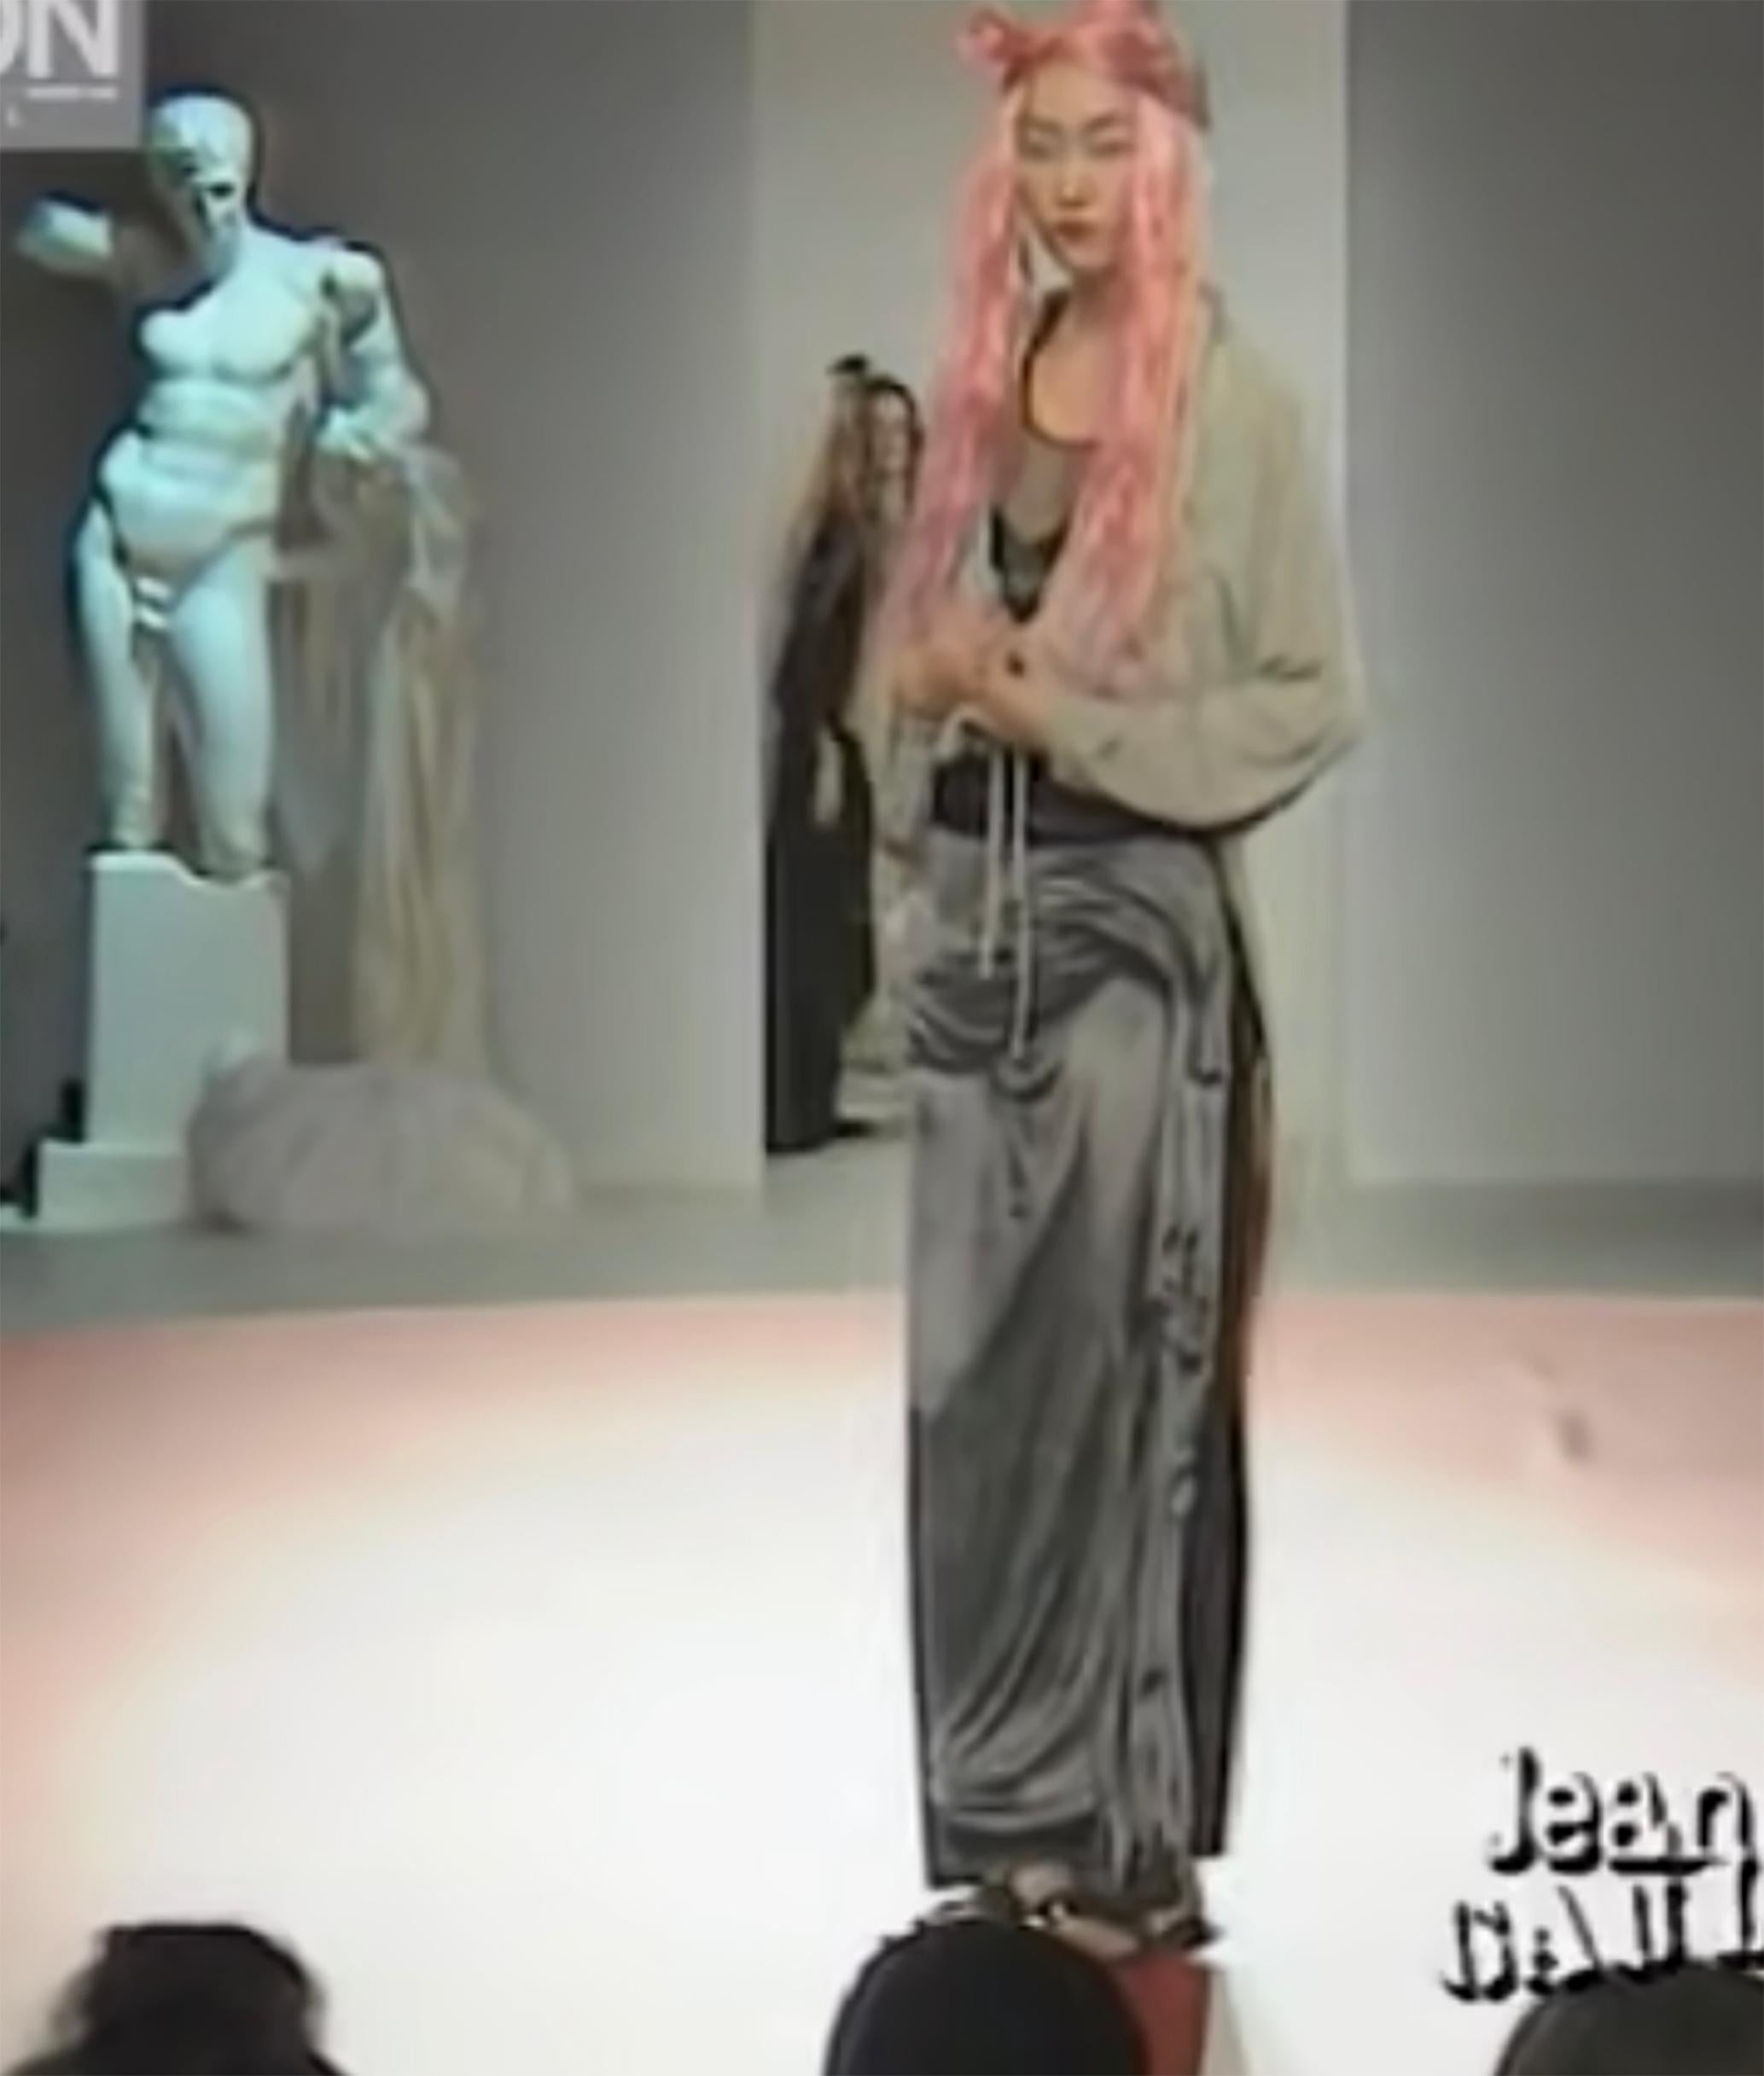 S/S 1999 JEAN PAUL GAULTIER Statue Dress
also in Met collection 
condition: Excellent
100% silk
30